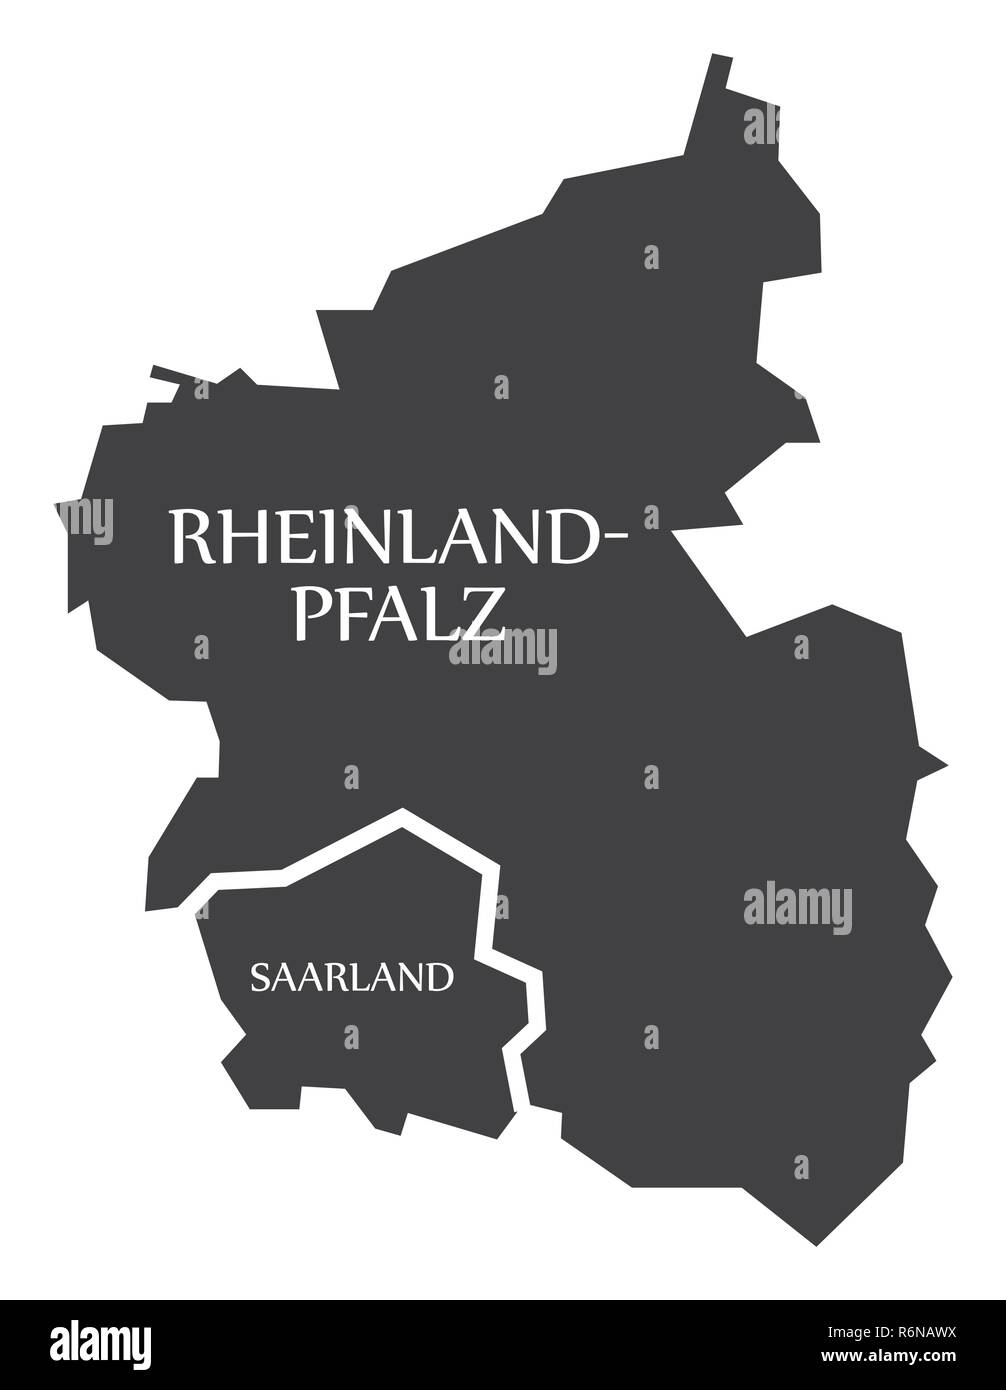 Rhineland Palatinate - Saarland federal states map of Germany black with titles Stock Vector